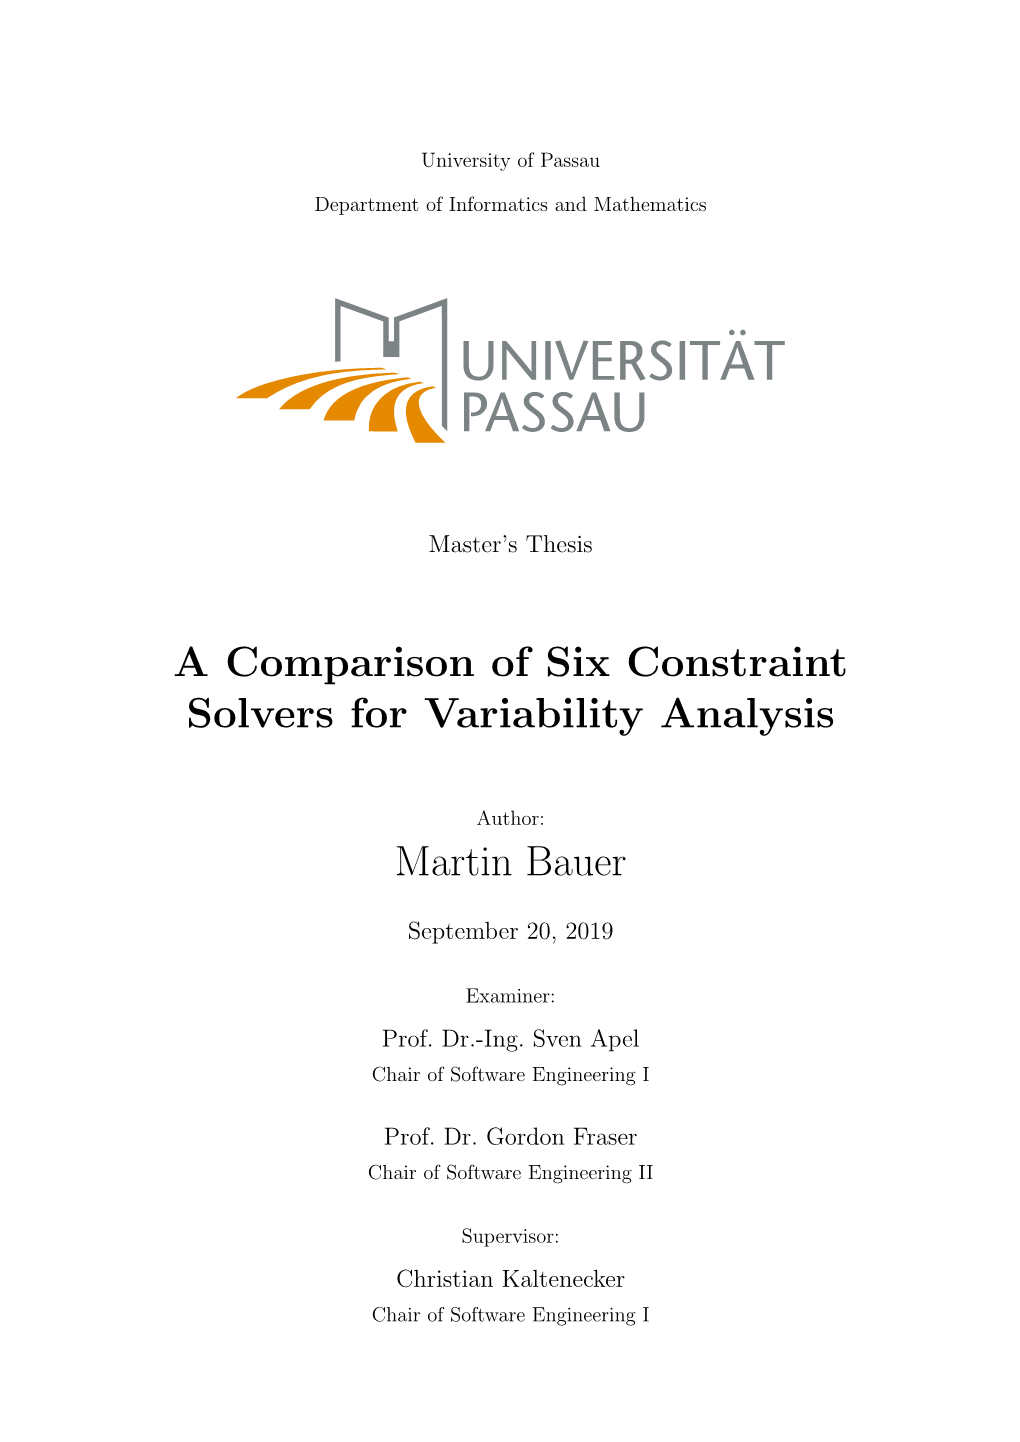 A Comparison of Six Constraint Solvers for Variability Analysis